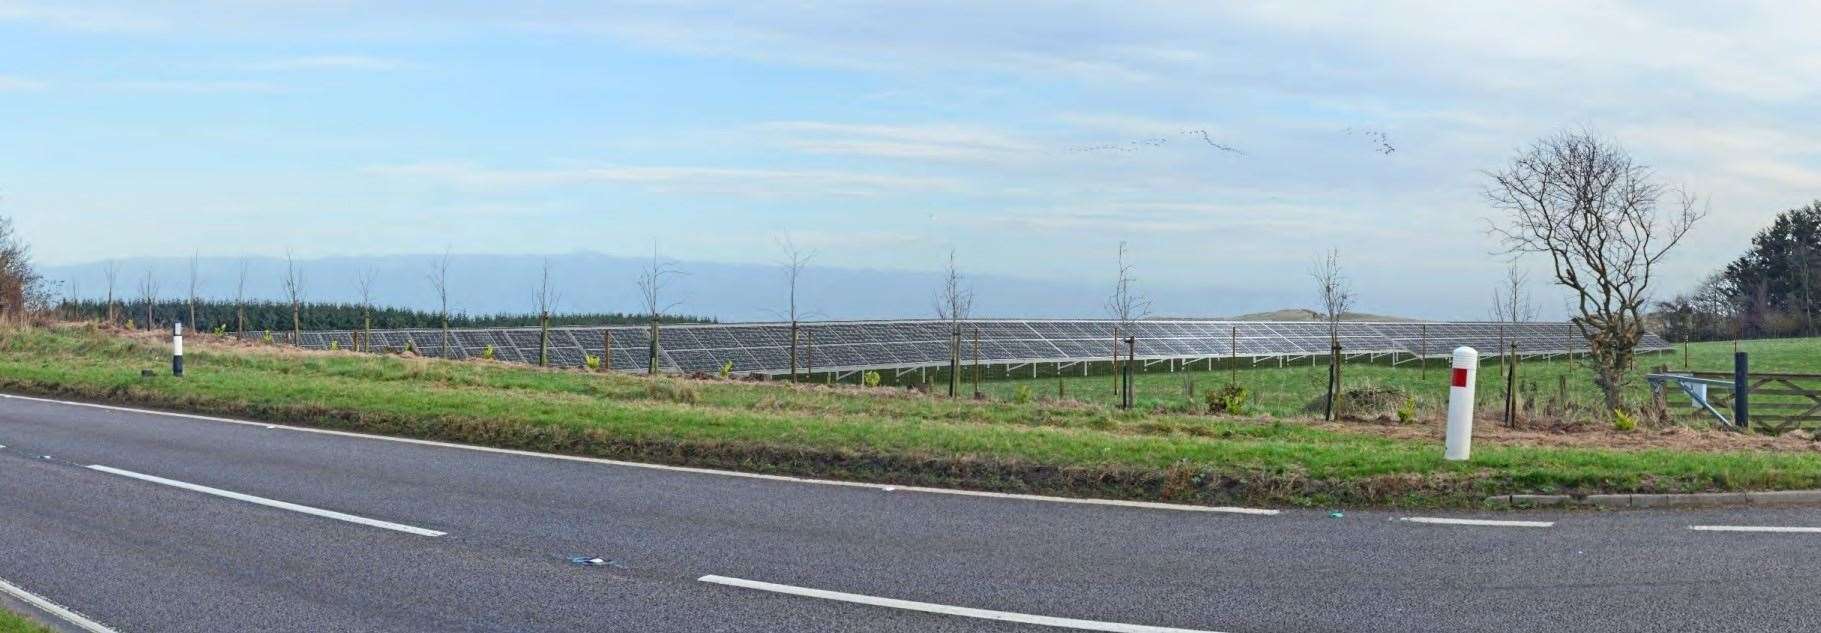 An impression of how the solar farm at St Fergus would look